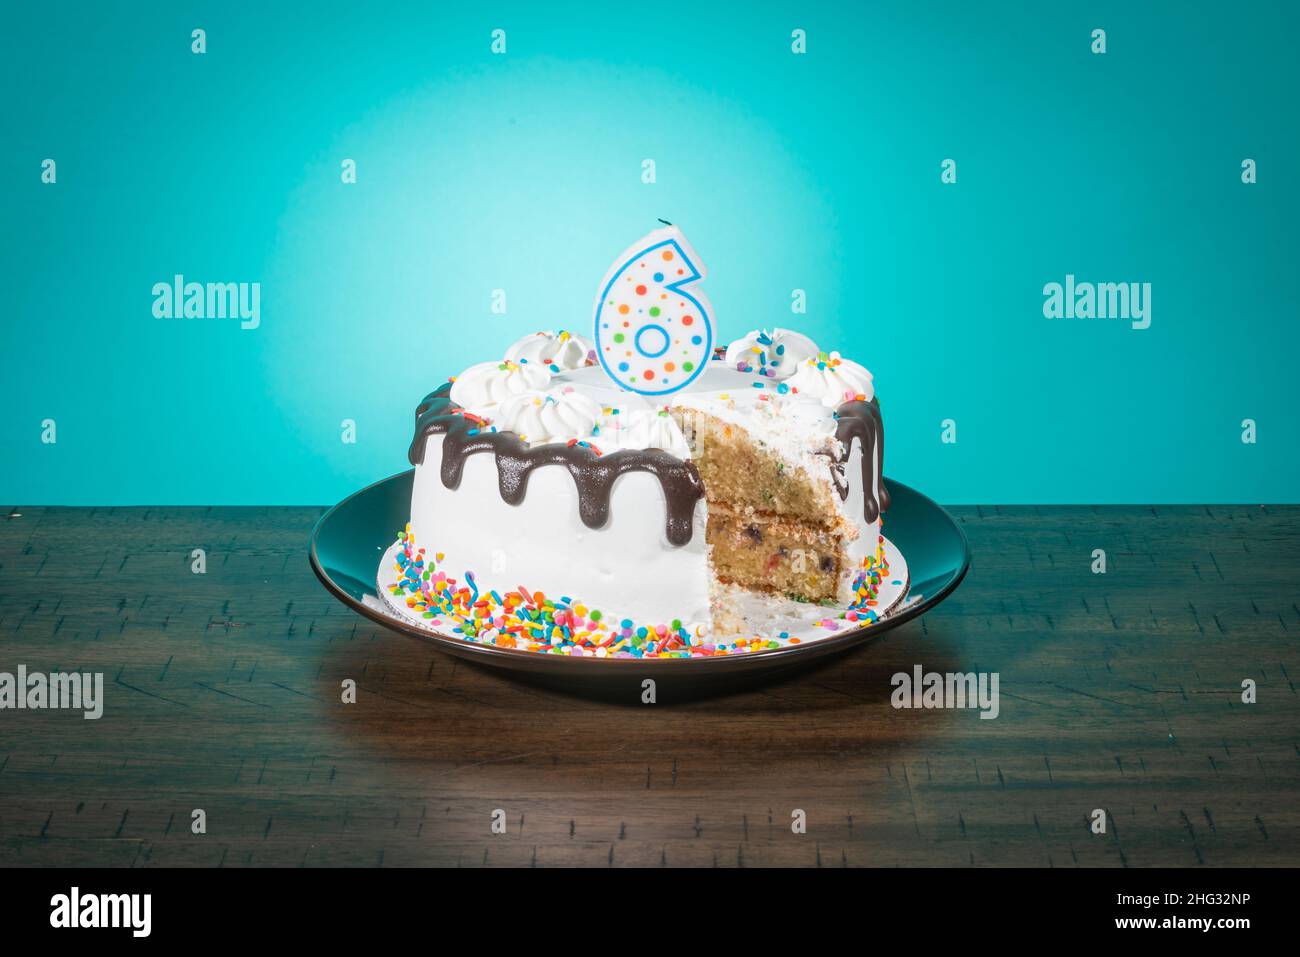 A birthday cake, missing a slice, bears a candle in the shape of the number 6. Stock Photo